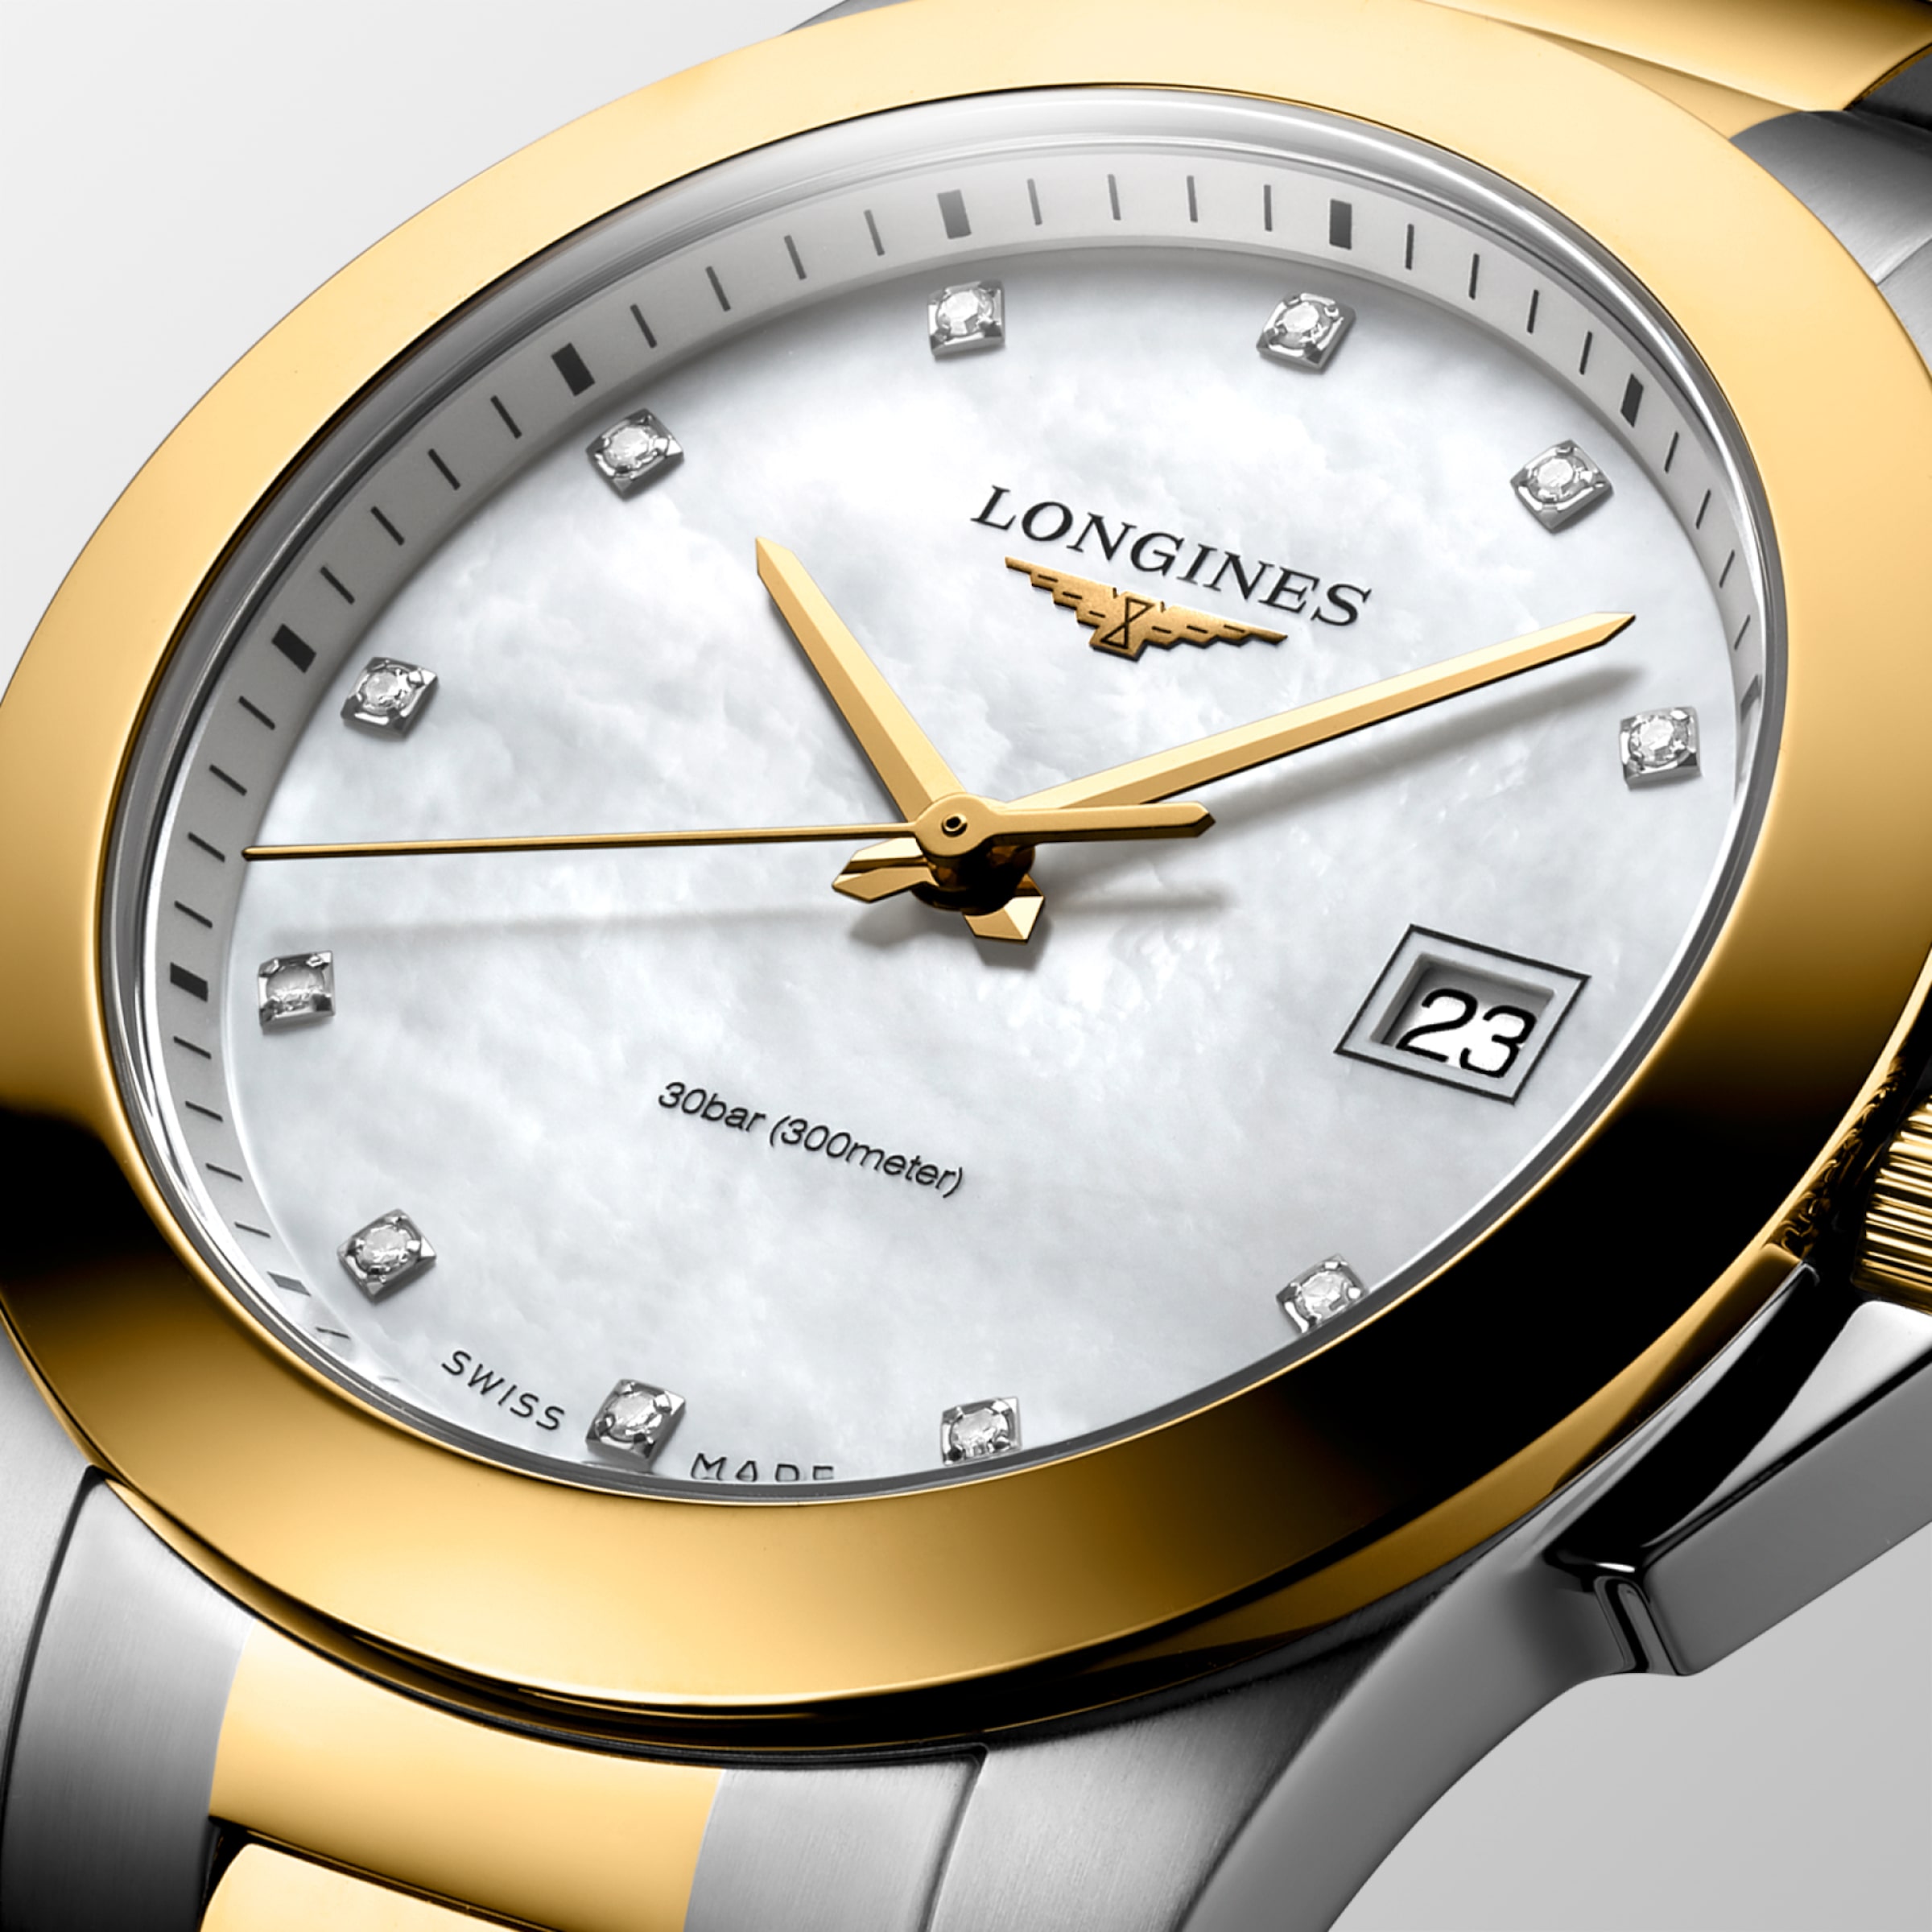 Longines CONQUEST Quartz Stainless steel and yellow PVD coating Watch - L3.377.3.87.7